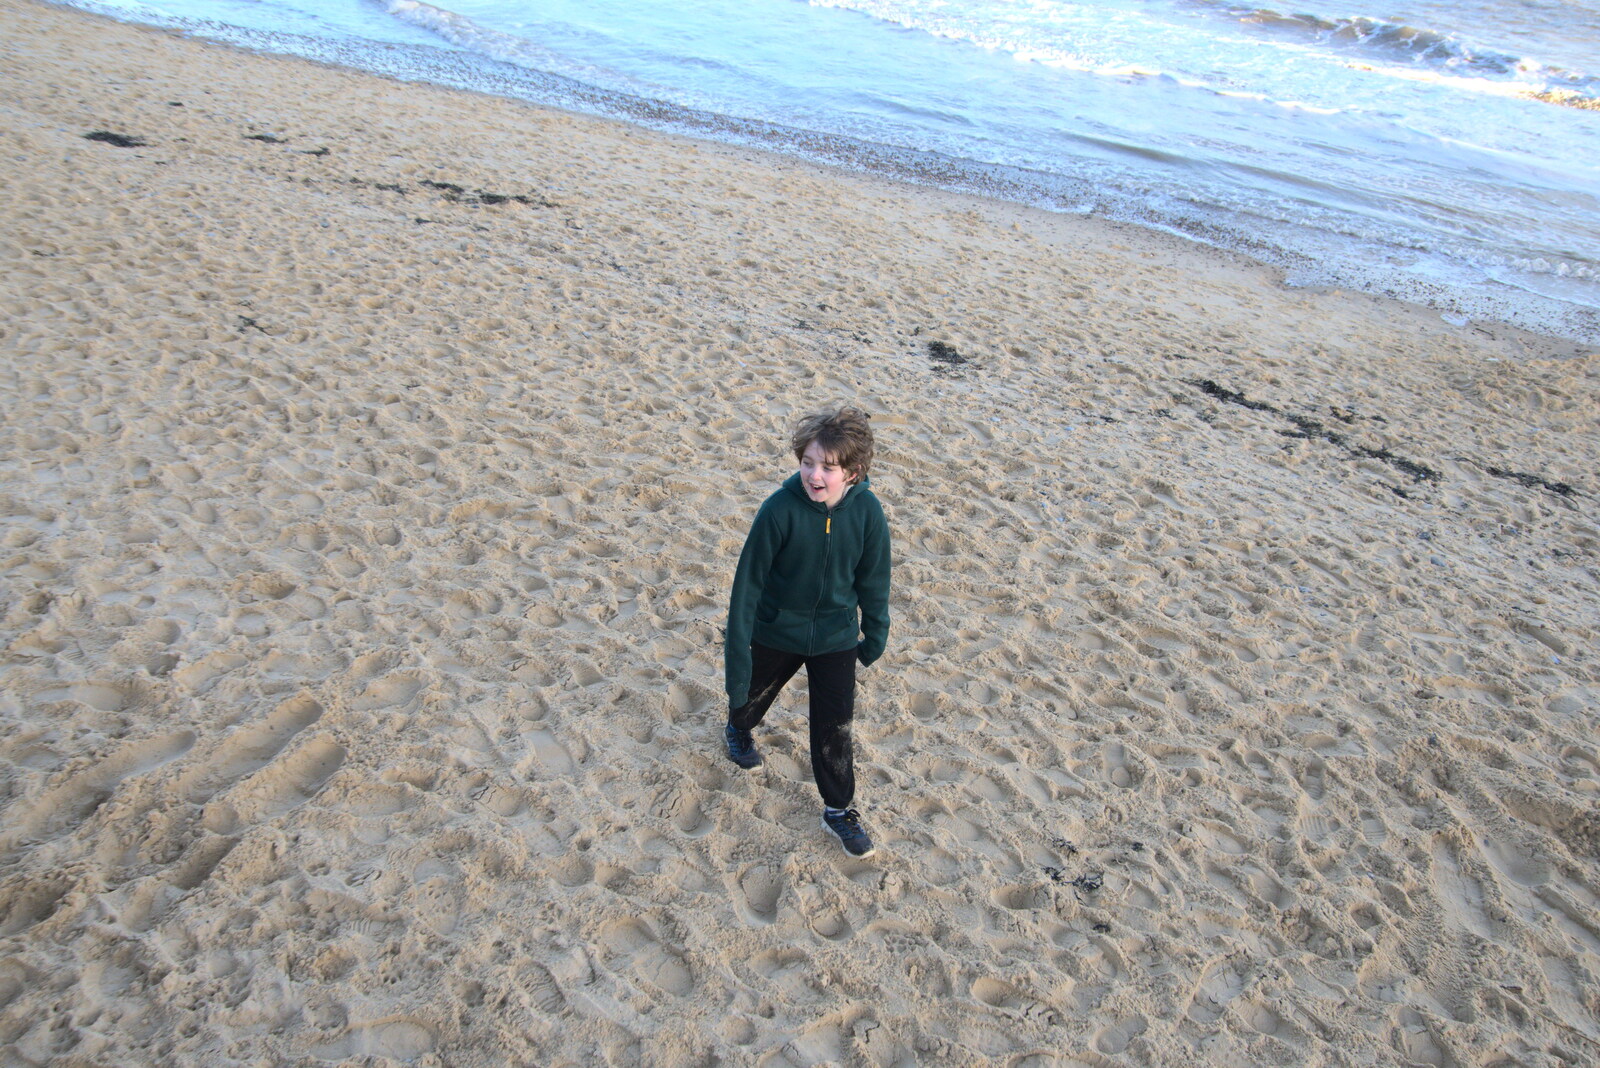 Fred on the beach from A Return to the Beach, Southwold, Suffolk - 20th December 2020